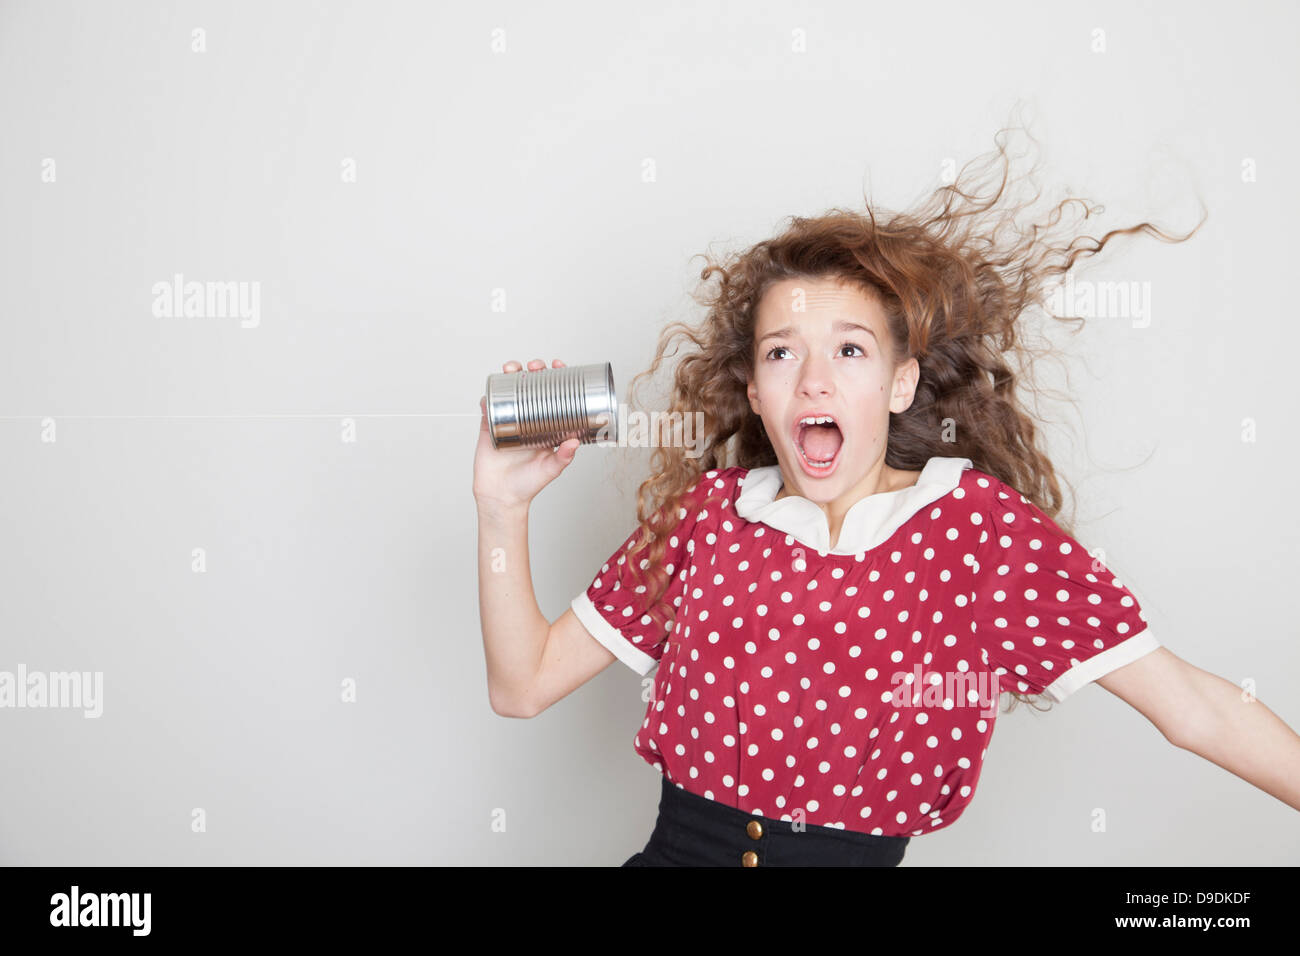 Girl with tin can telephone, mouth open Stock Photo